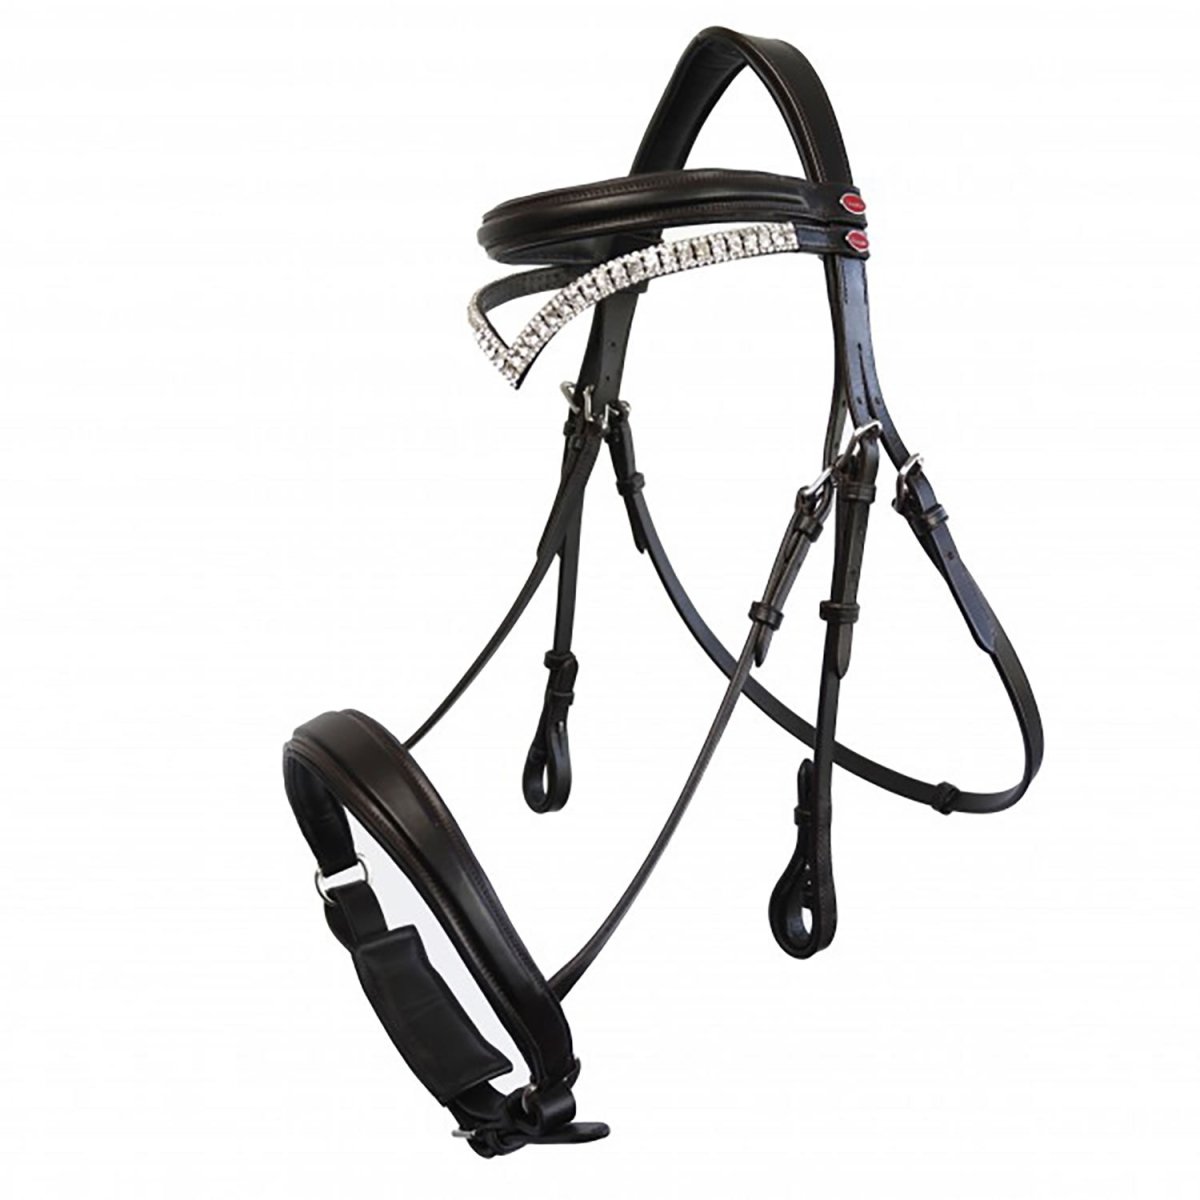 Whitaker Lynton Snaffle Bridle C/W Spare Browband - Black - Full